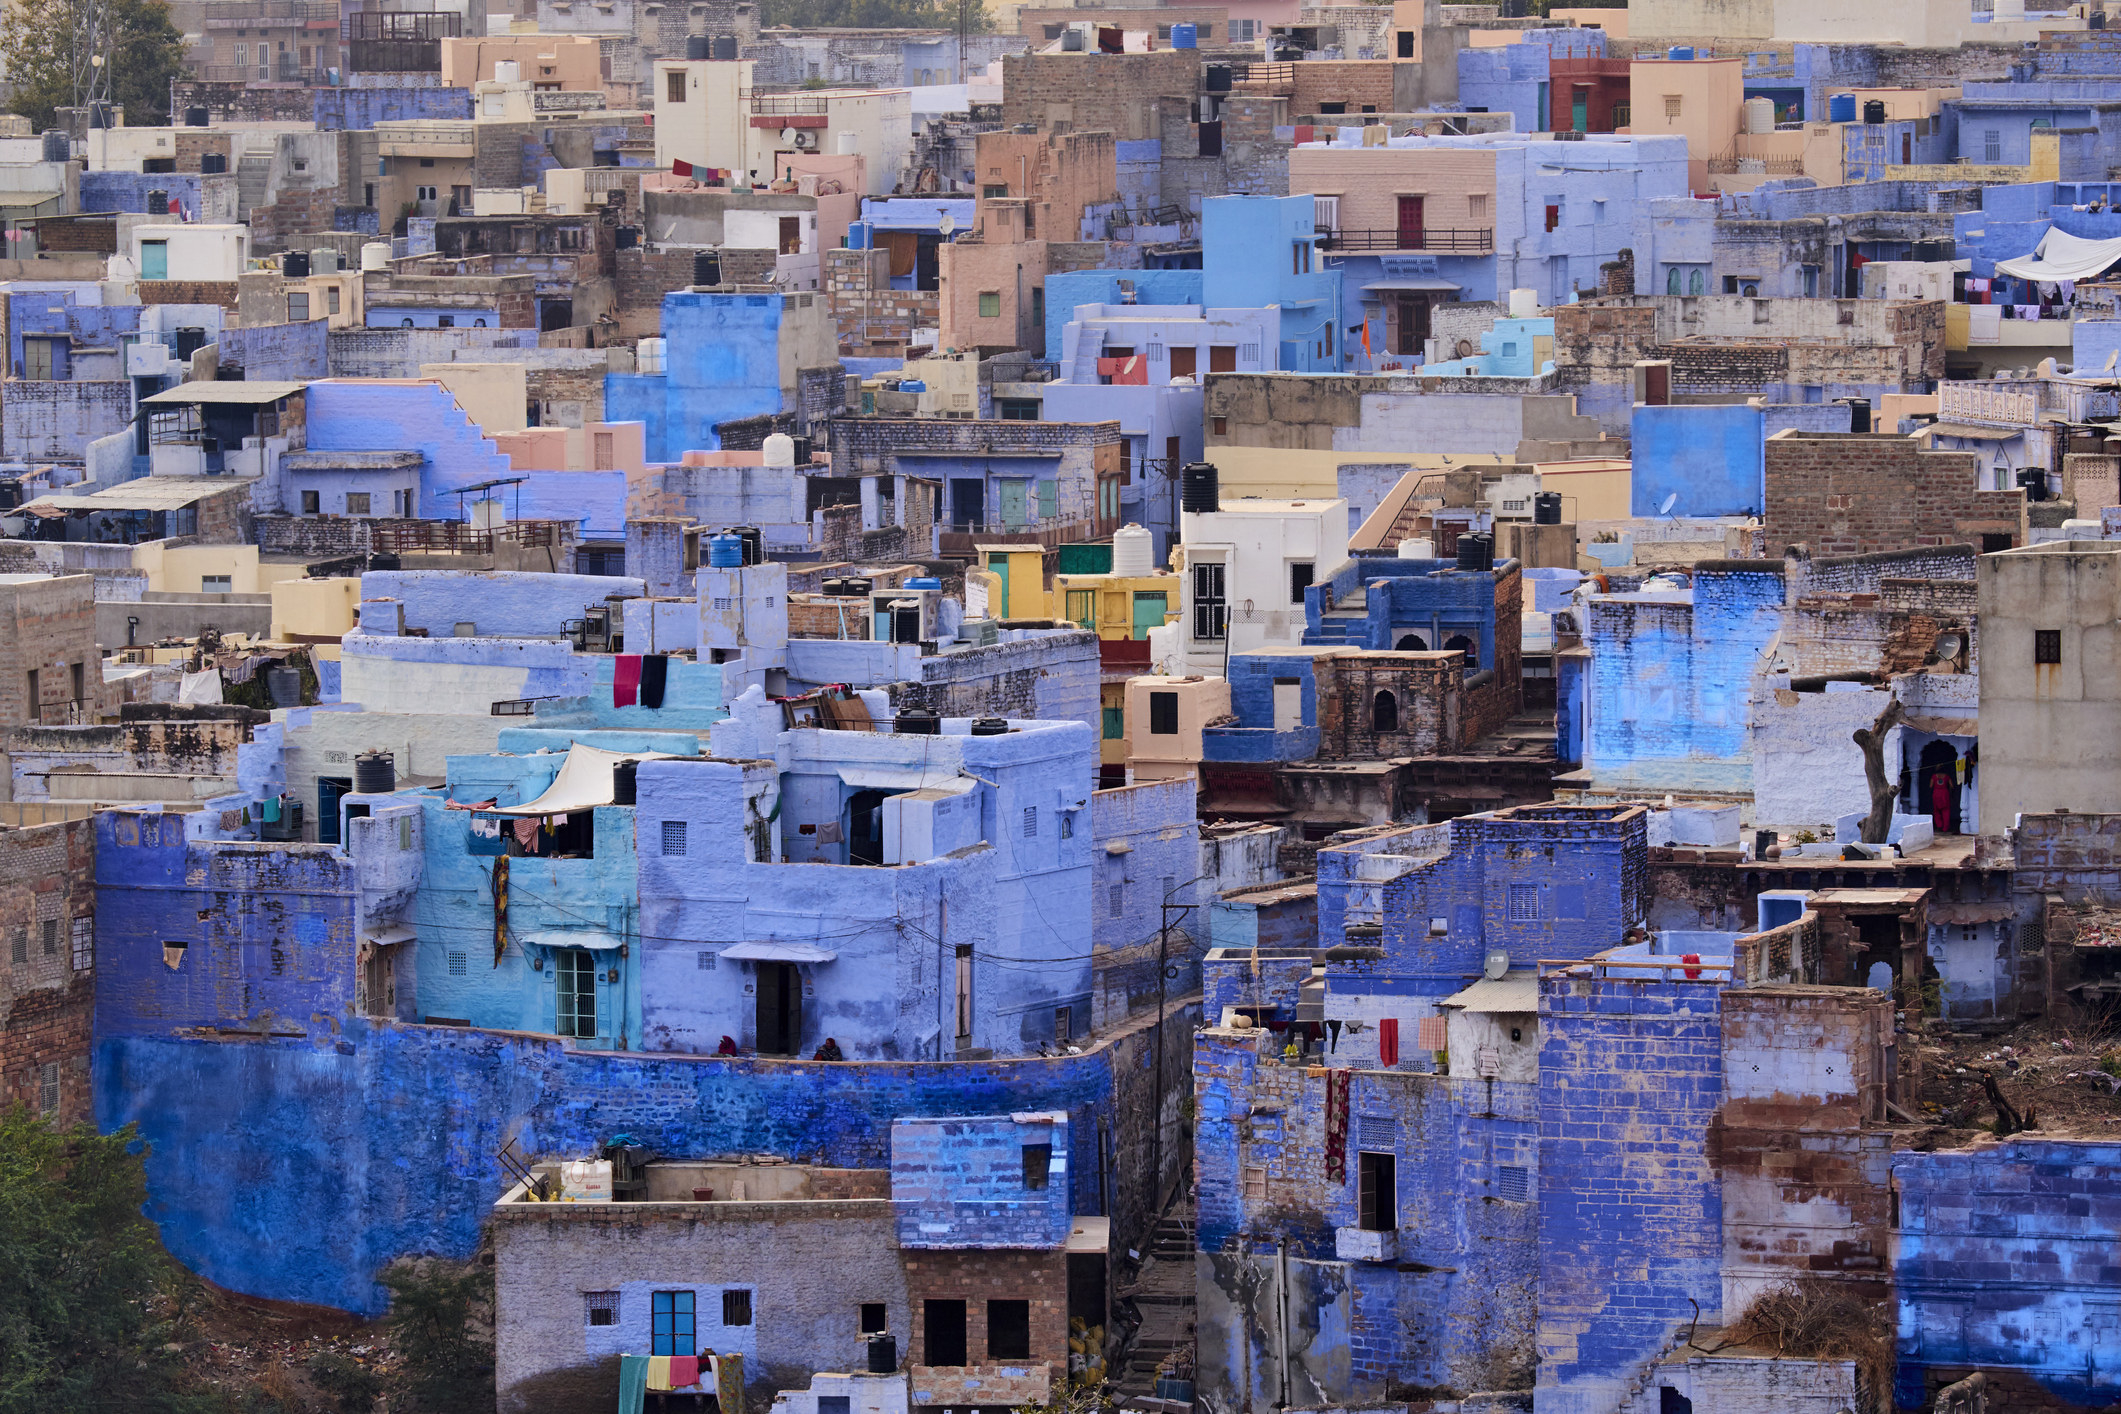 Rajasthan, the blue city, India.